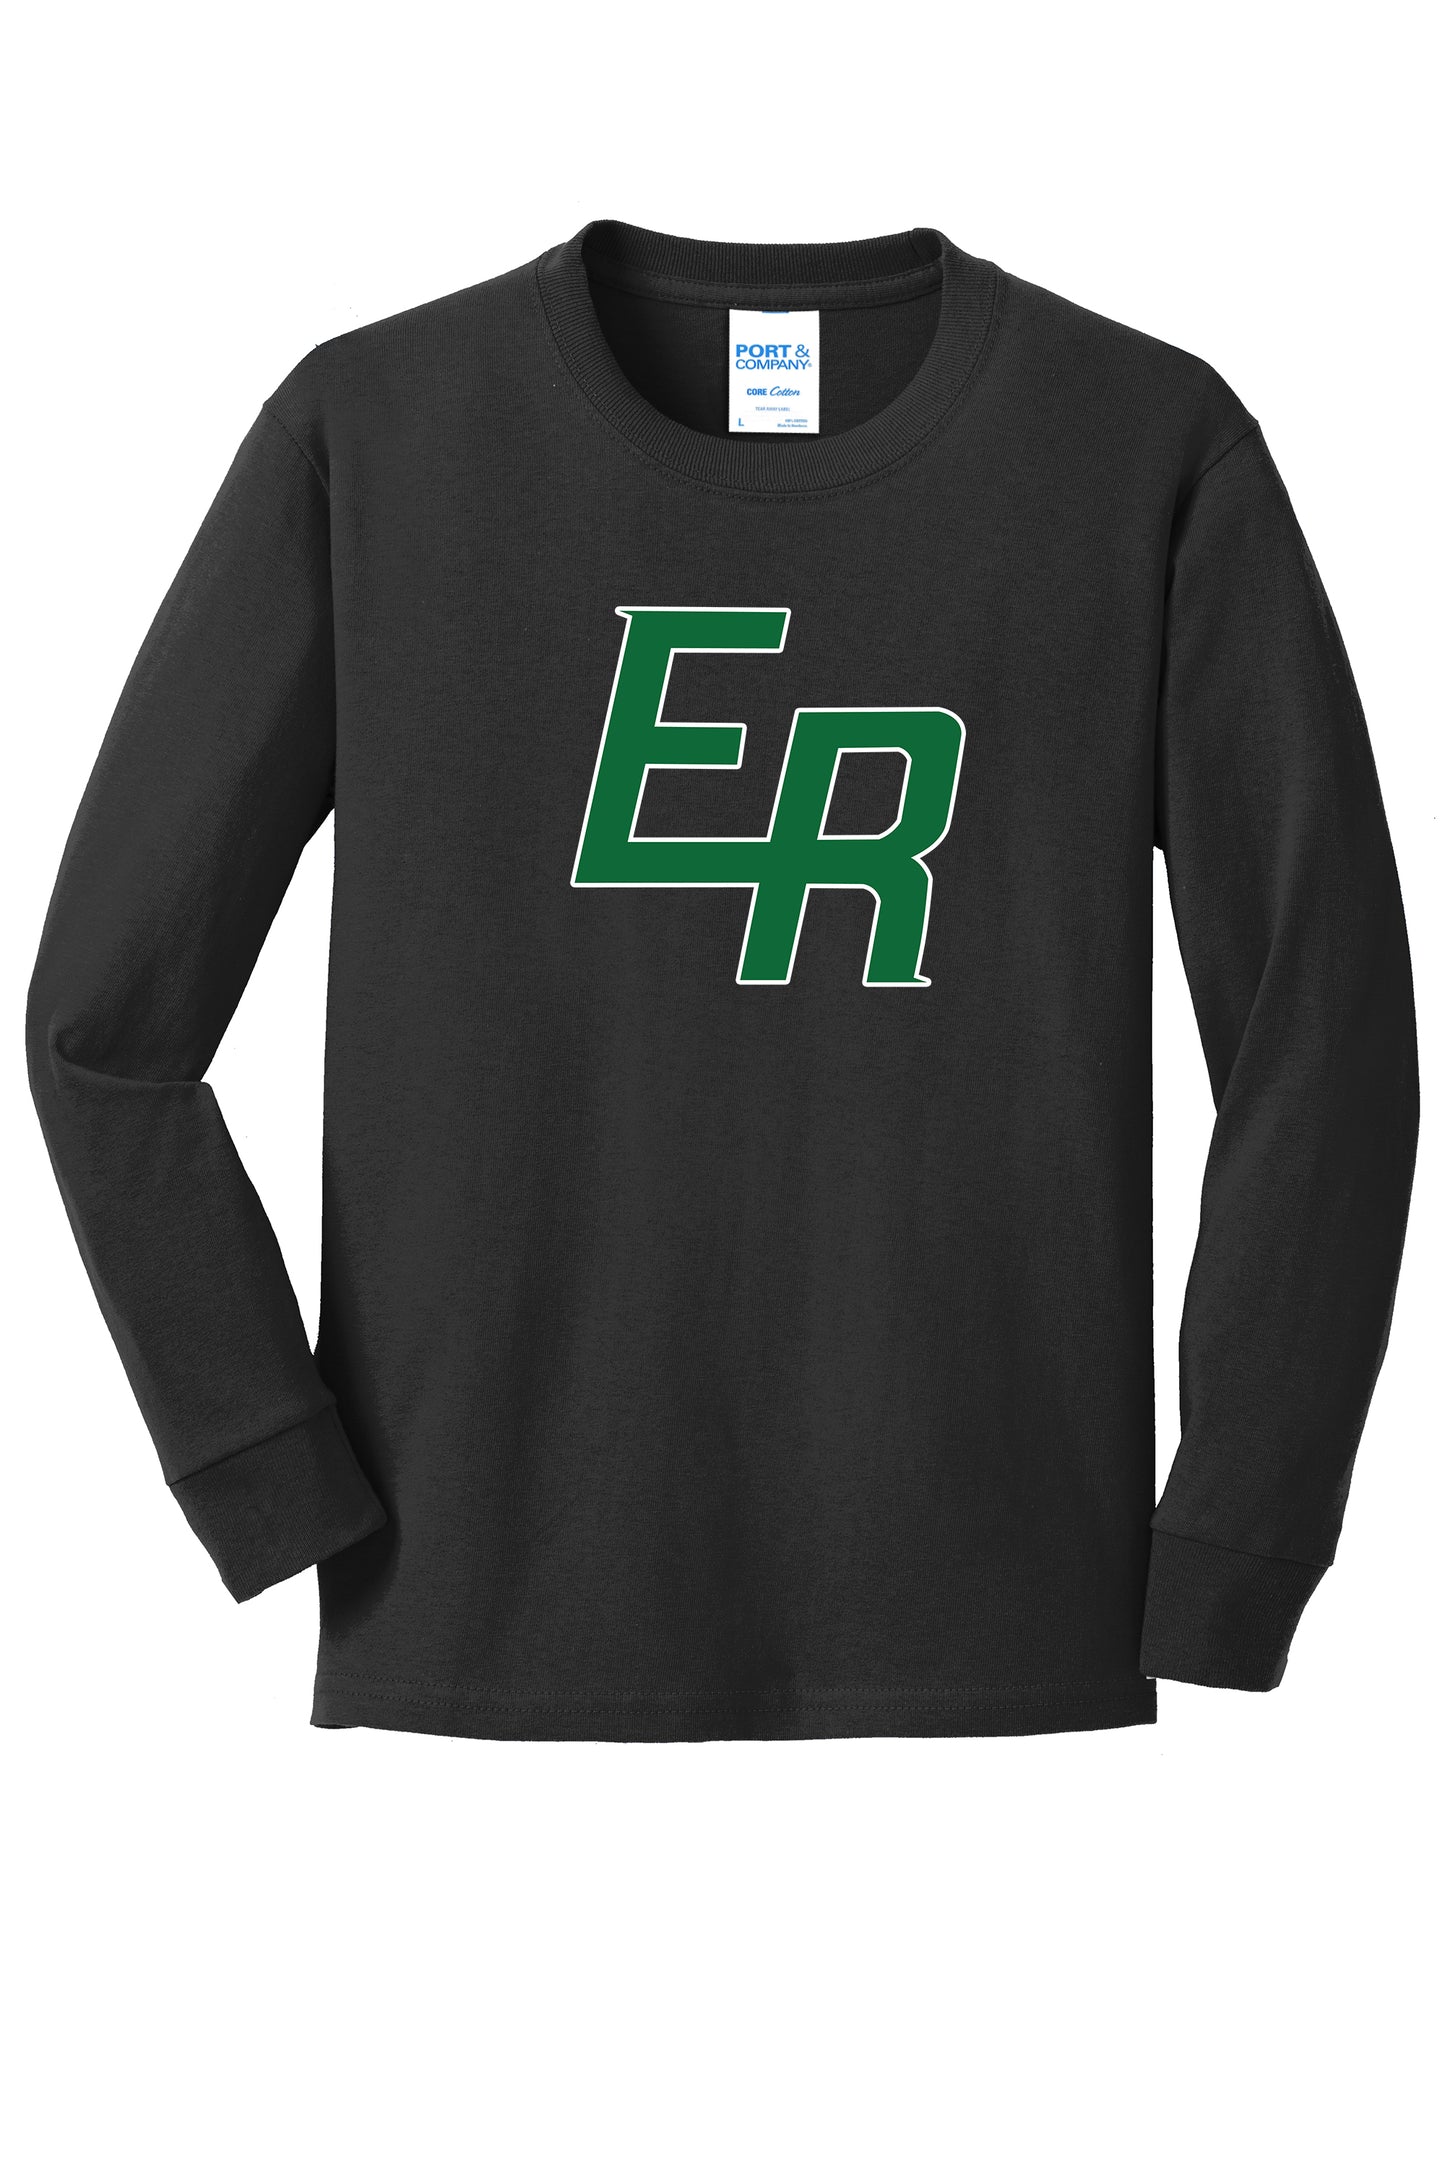 Ramblers Youth Longsleeve T-shirt - PC54YLS (color options available)